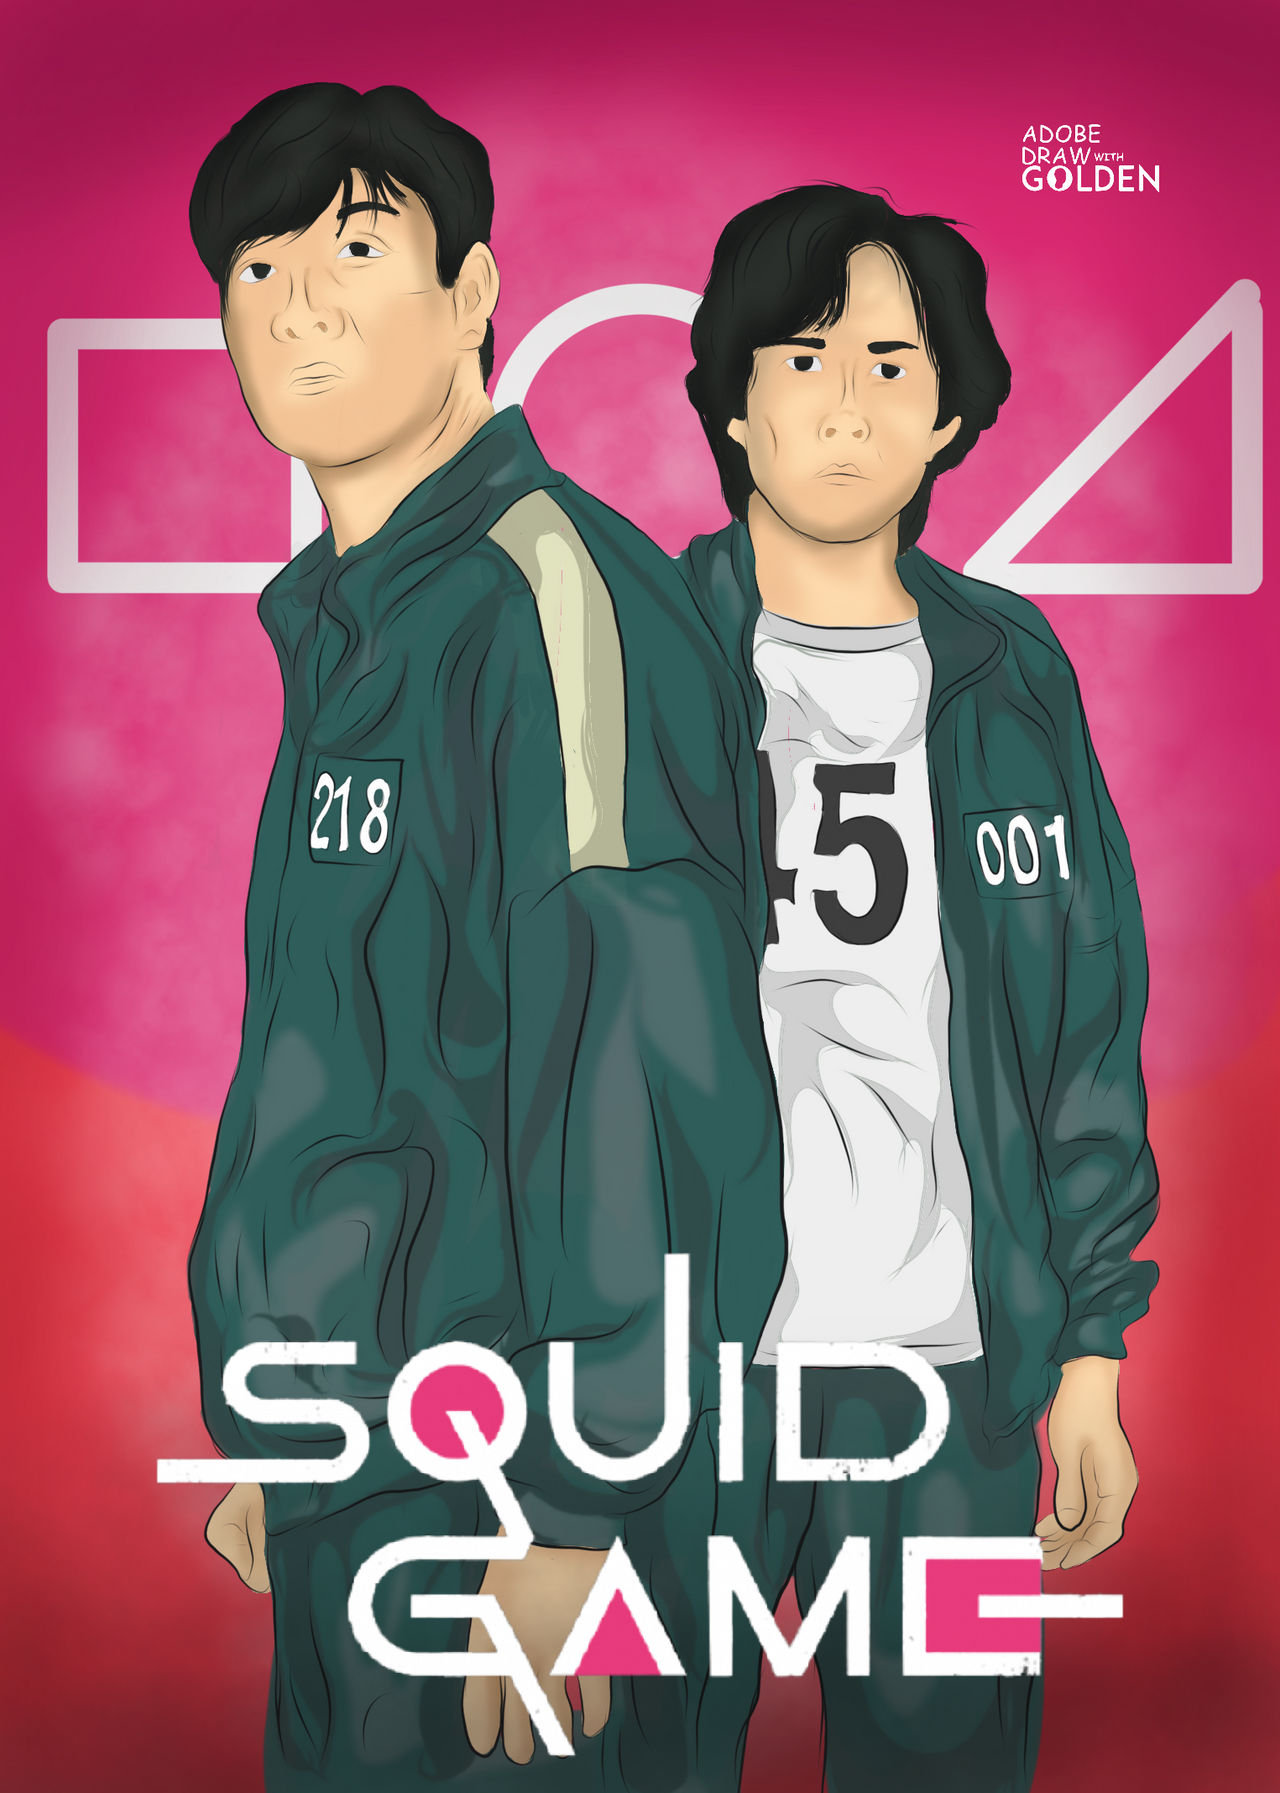 Squid game poster